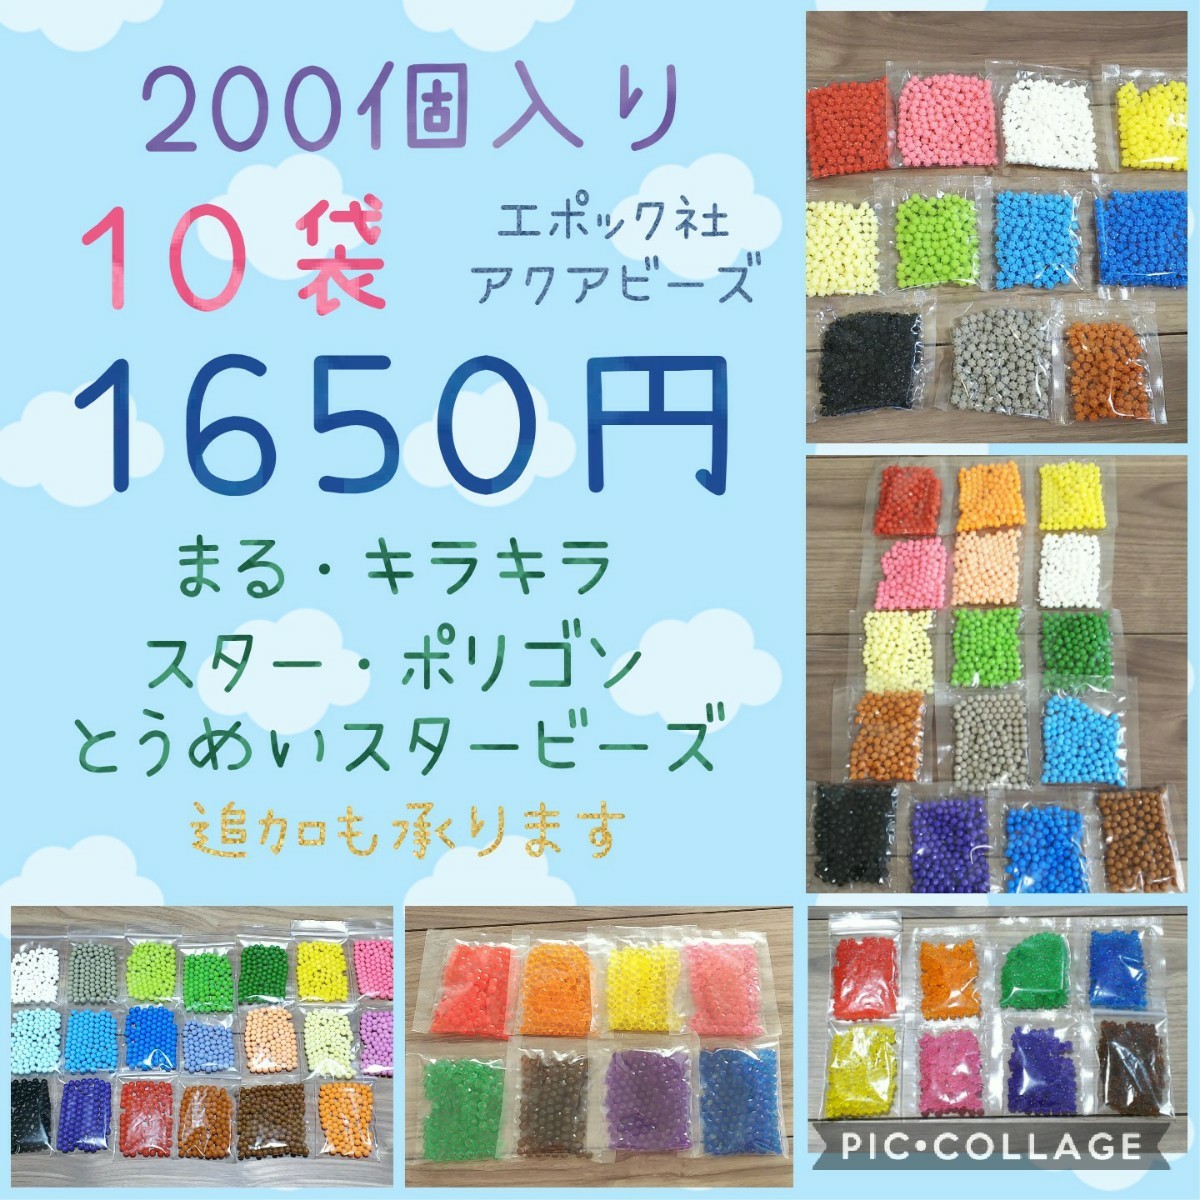 64%OFF!】 正規アクアビーズ 100個入り10袋セット shellys.co.in